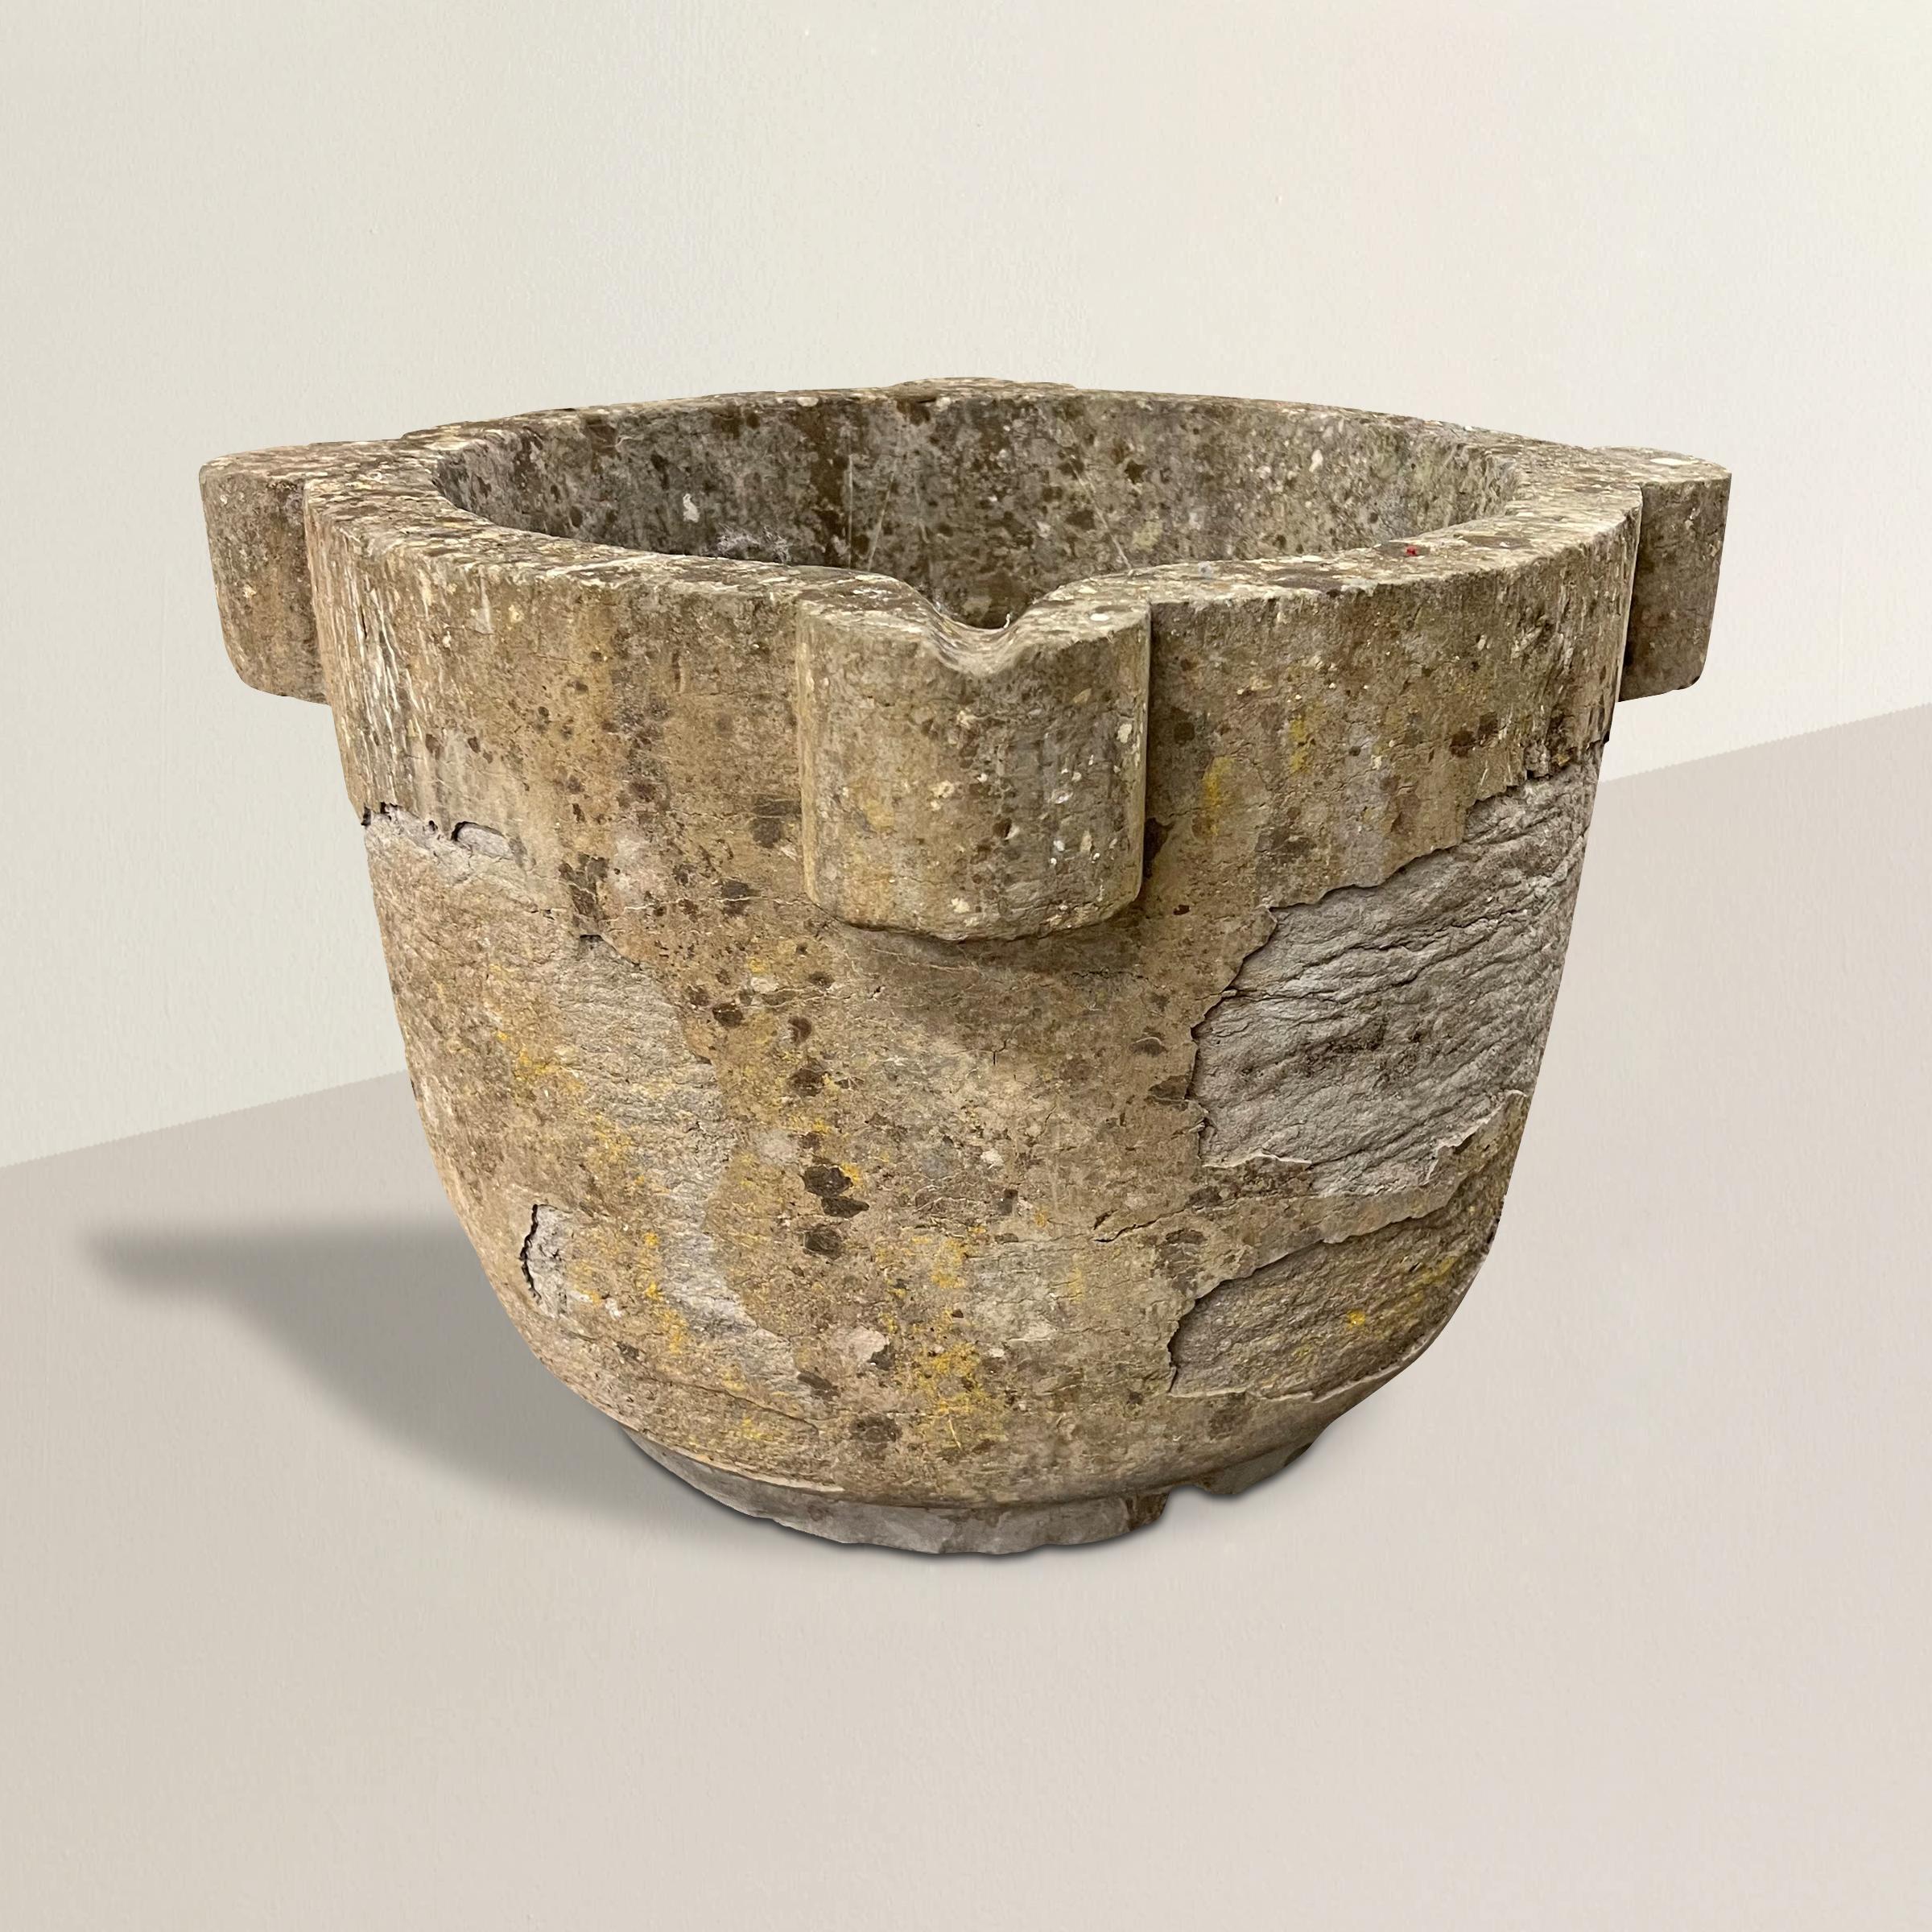 A remarkable massive 18th century French limestone mortar with an incredible weathered surface with lichens. An incredible scale, perfect for planting an ornamental bush, bulbs in the spring, or leave empty and enjoy the beauty of this monumental